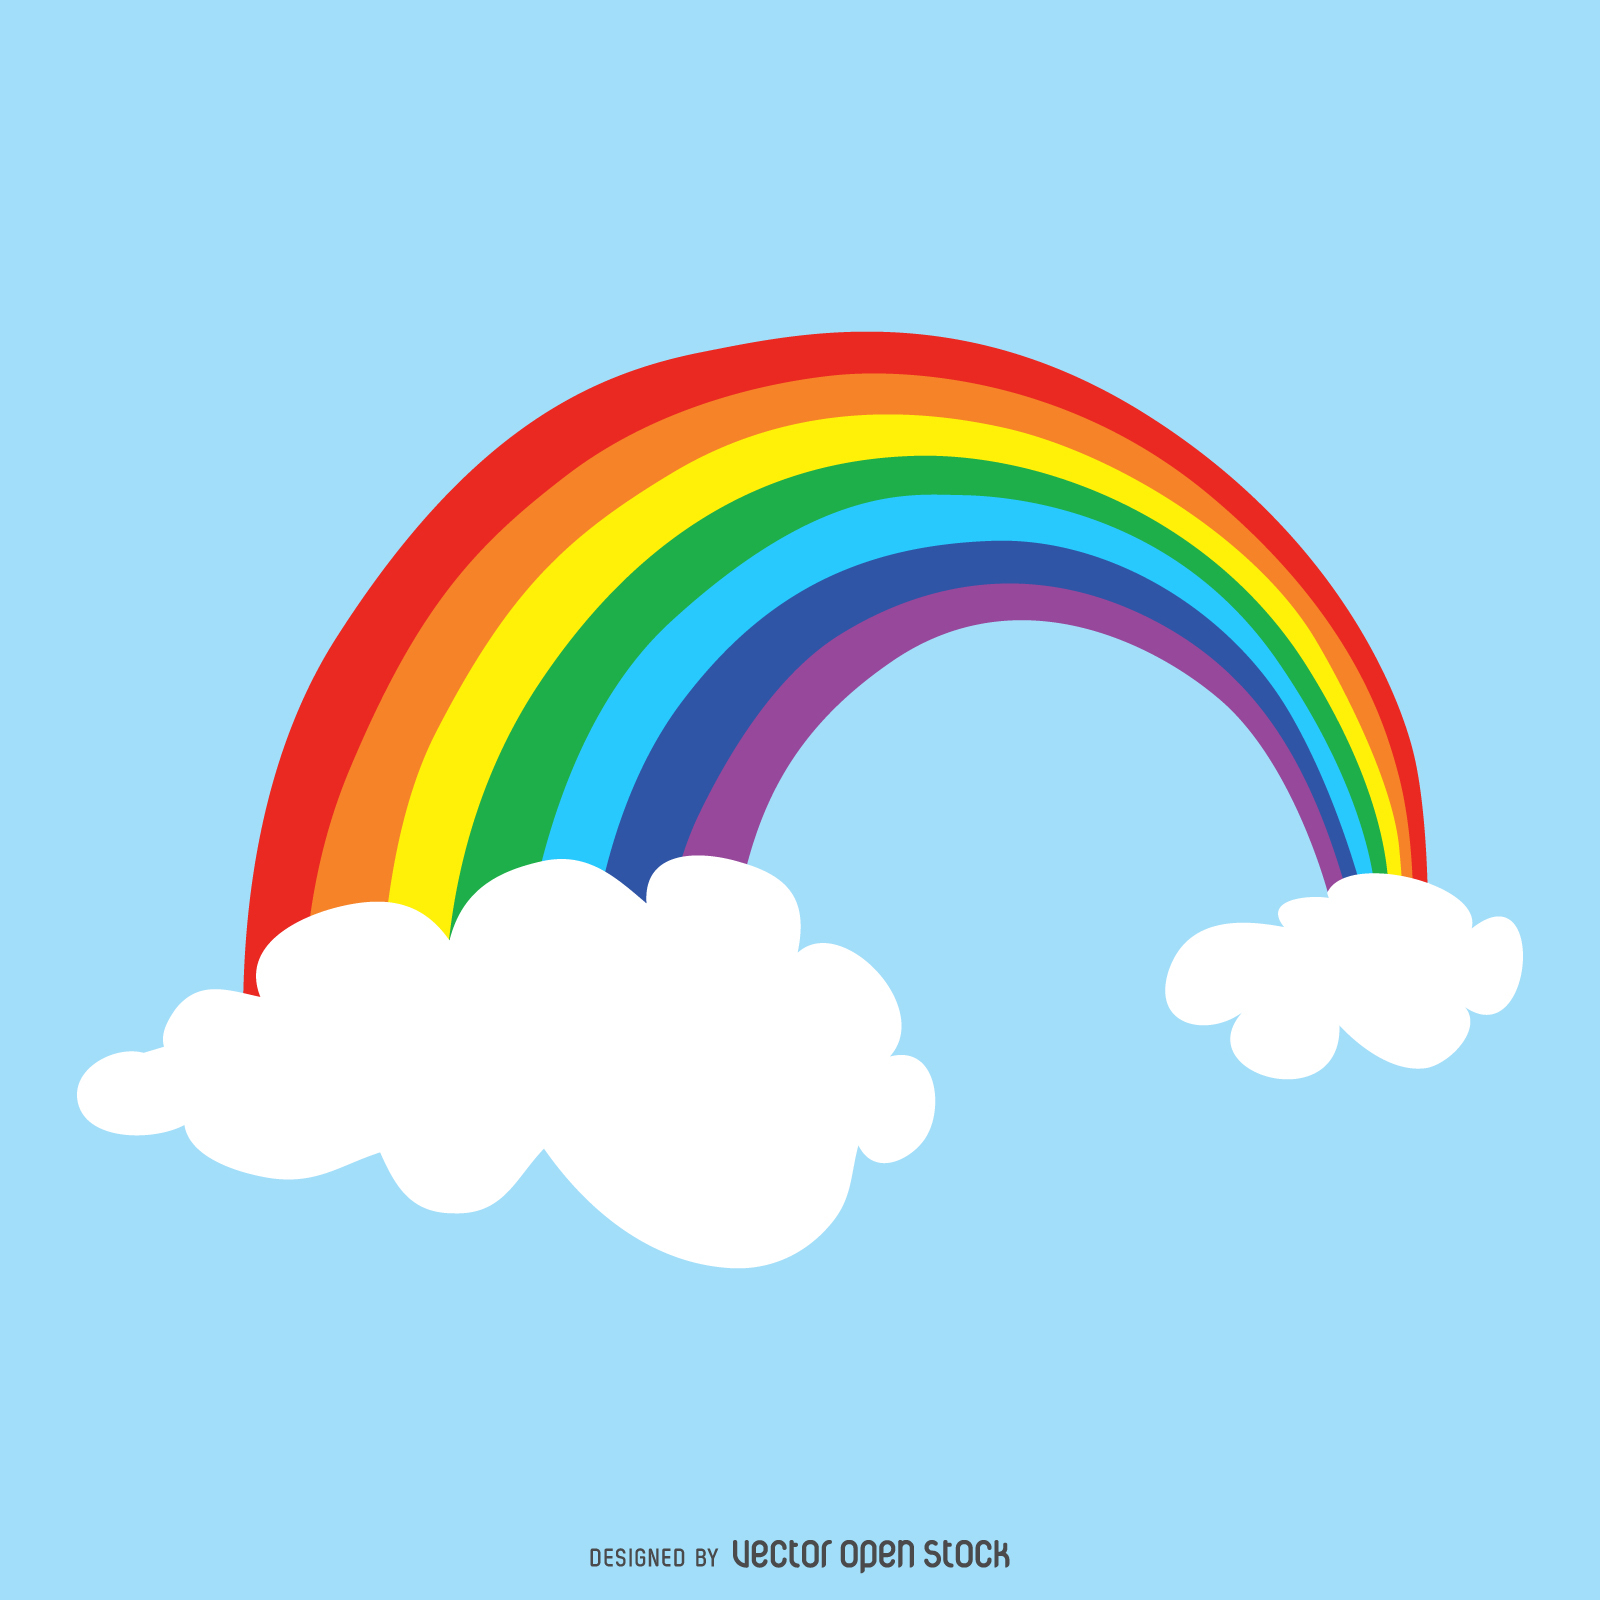 Bright rainbow drawing - Vector download